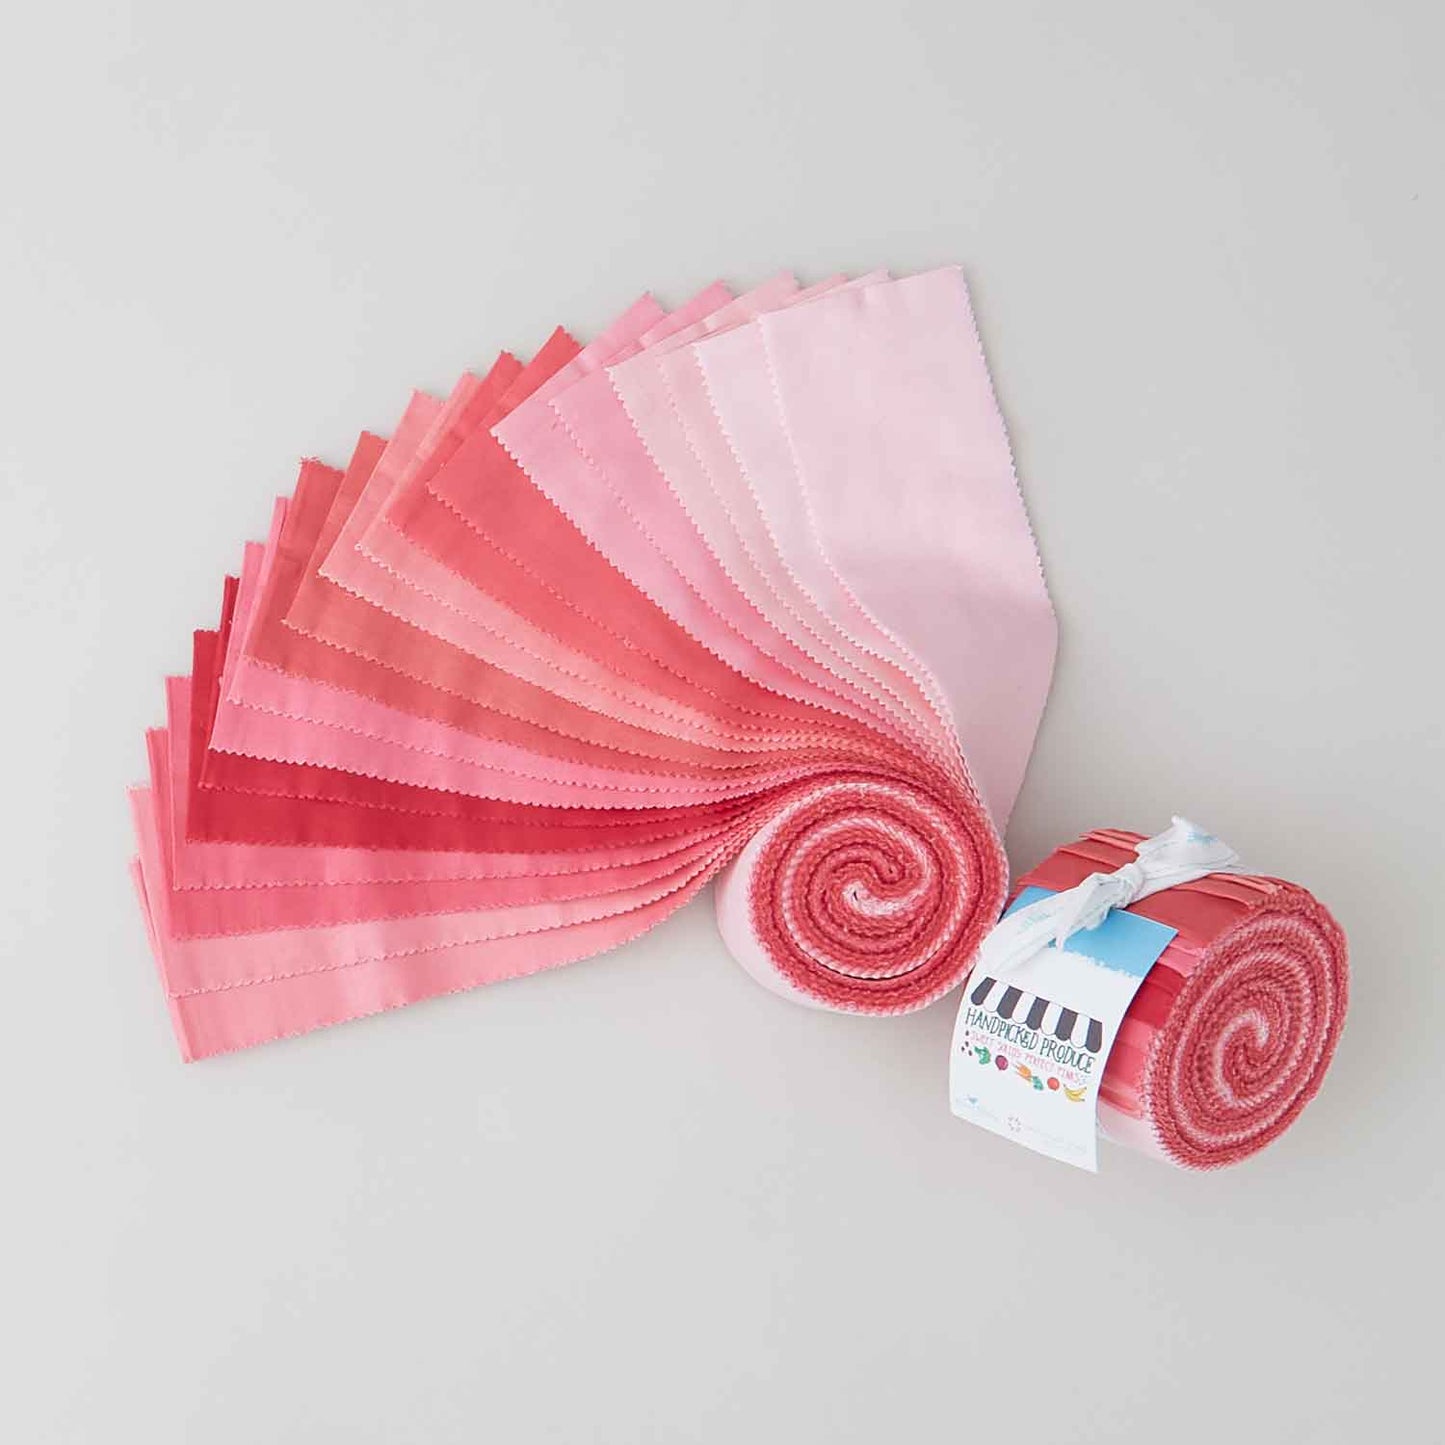 Handpicked Produce - Sweet Solids Perfect Pinks Rolie Polie 20 pcs. Primary Image